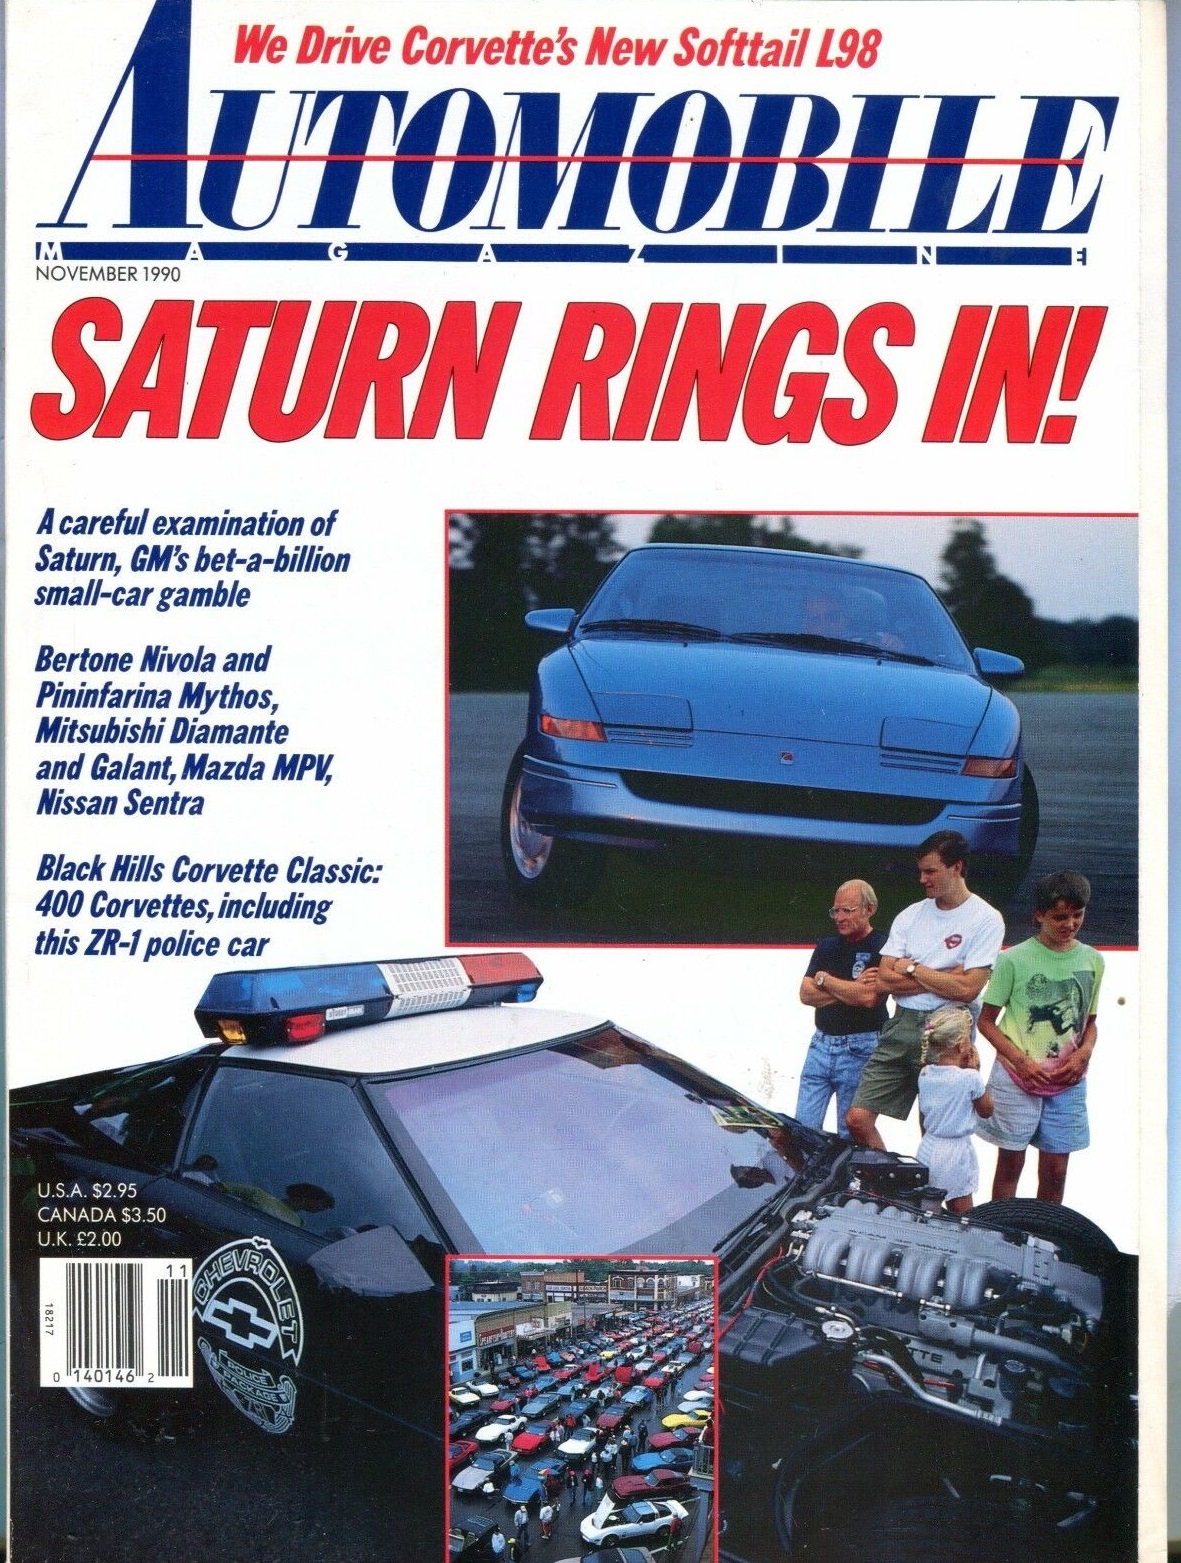 Automobile # 8, November 1990, Automobile # 8, November 1990 Magazine Back Issue Published by Car & Drivers Motor Trend Group. We Drive Corvette's New Softtail L98., We Drive Corvette's New Softtail L98